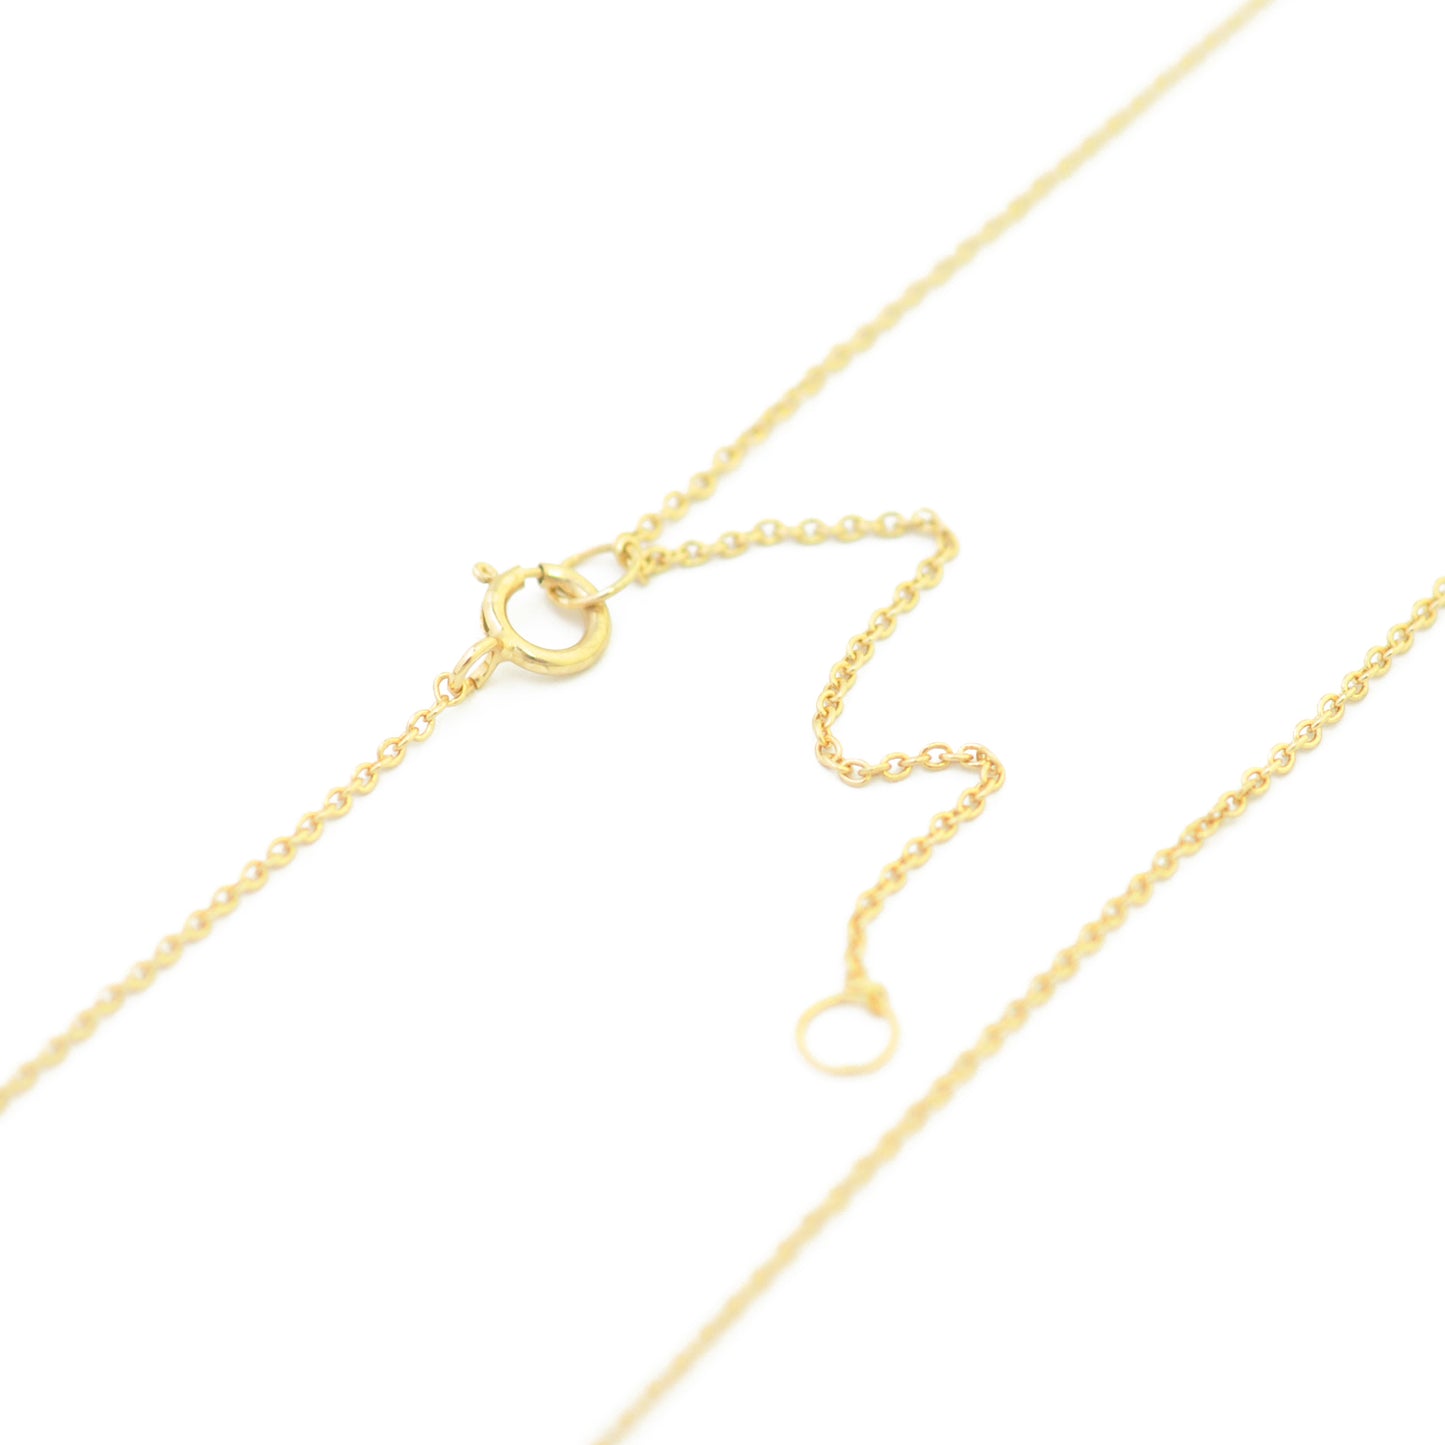 Delicate necklace / 925 sterling silver / 55-60 cm